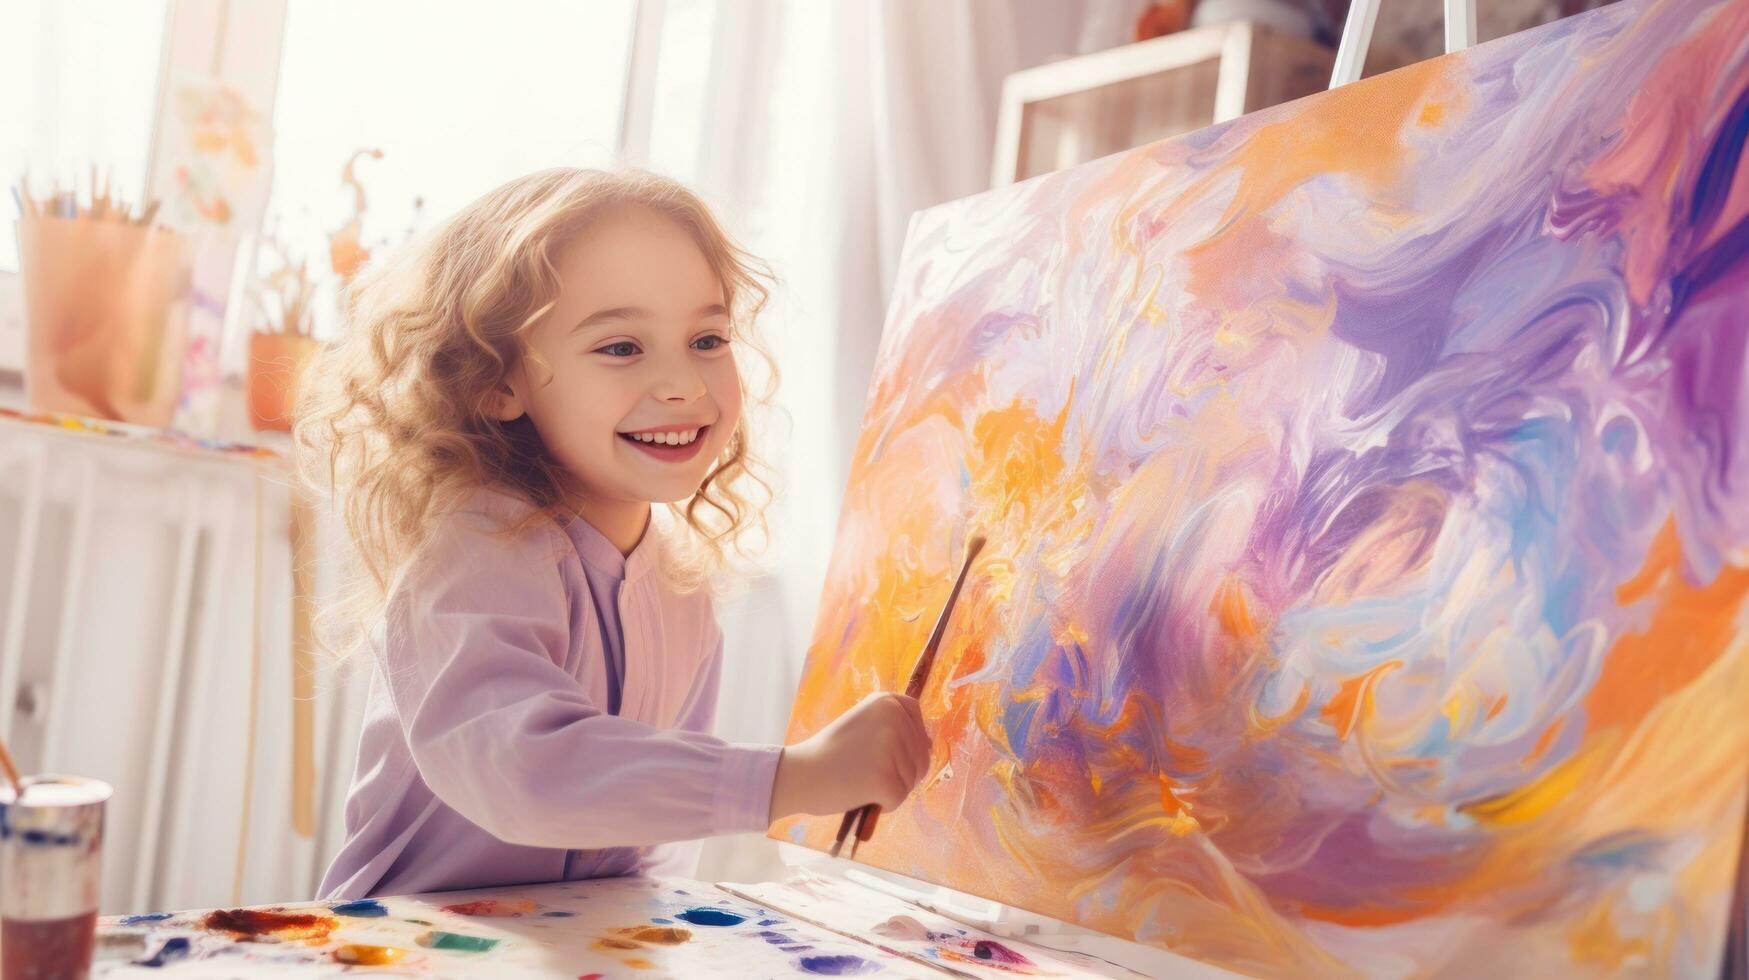 A little girl painting an abstract painting on an easel photo